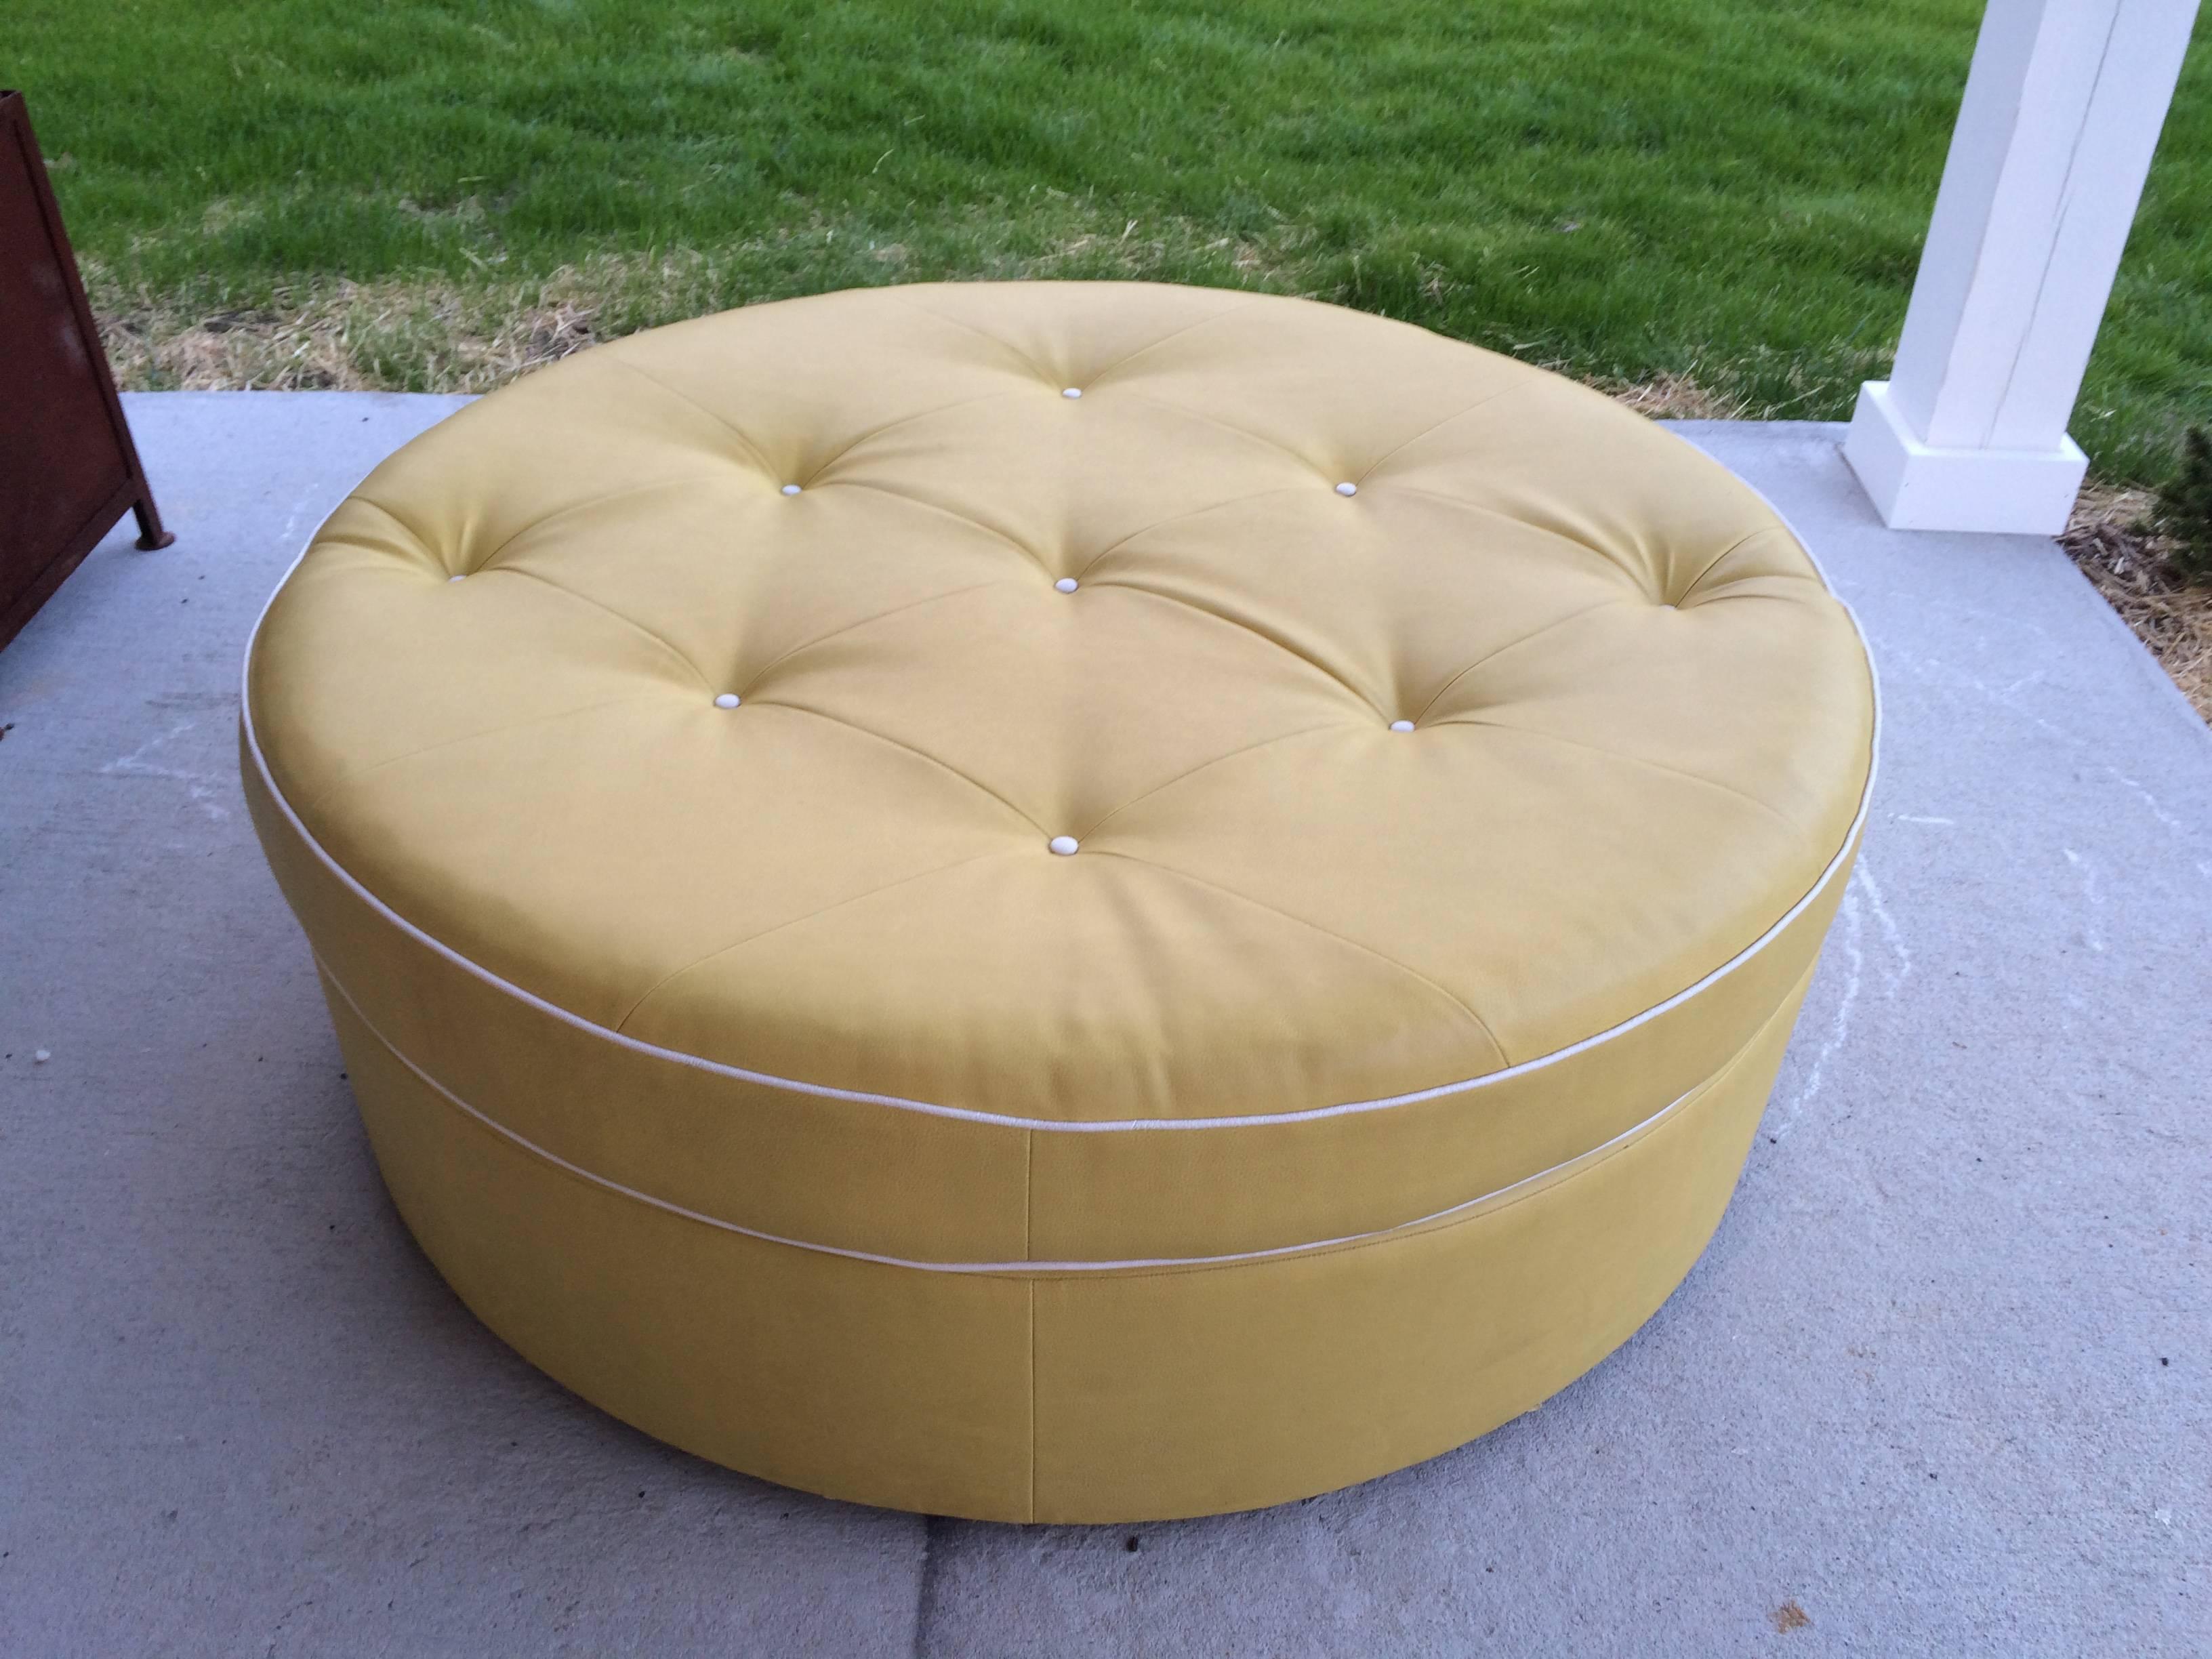 Tufted Round Yellow Ottoman. White buttons and piping against a yellow background. This item is on large brass casters so it is easy to move around. 
Great for dressing room or kids room. Or perfect classy bed for your pet.
Very Hollywood Glam.
